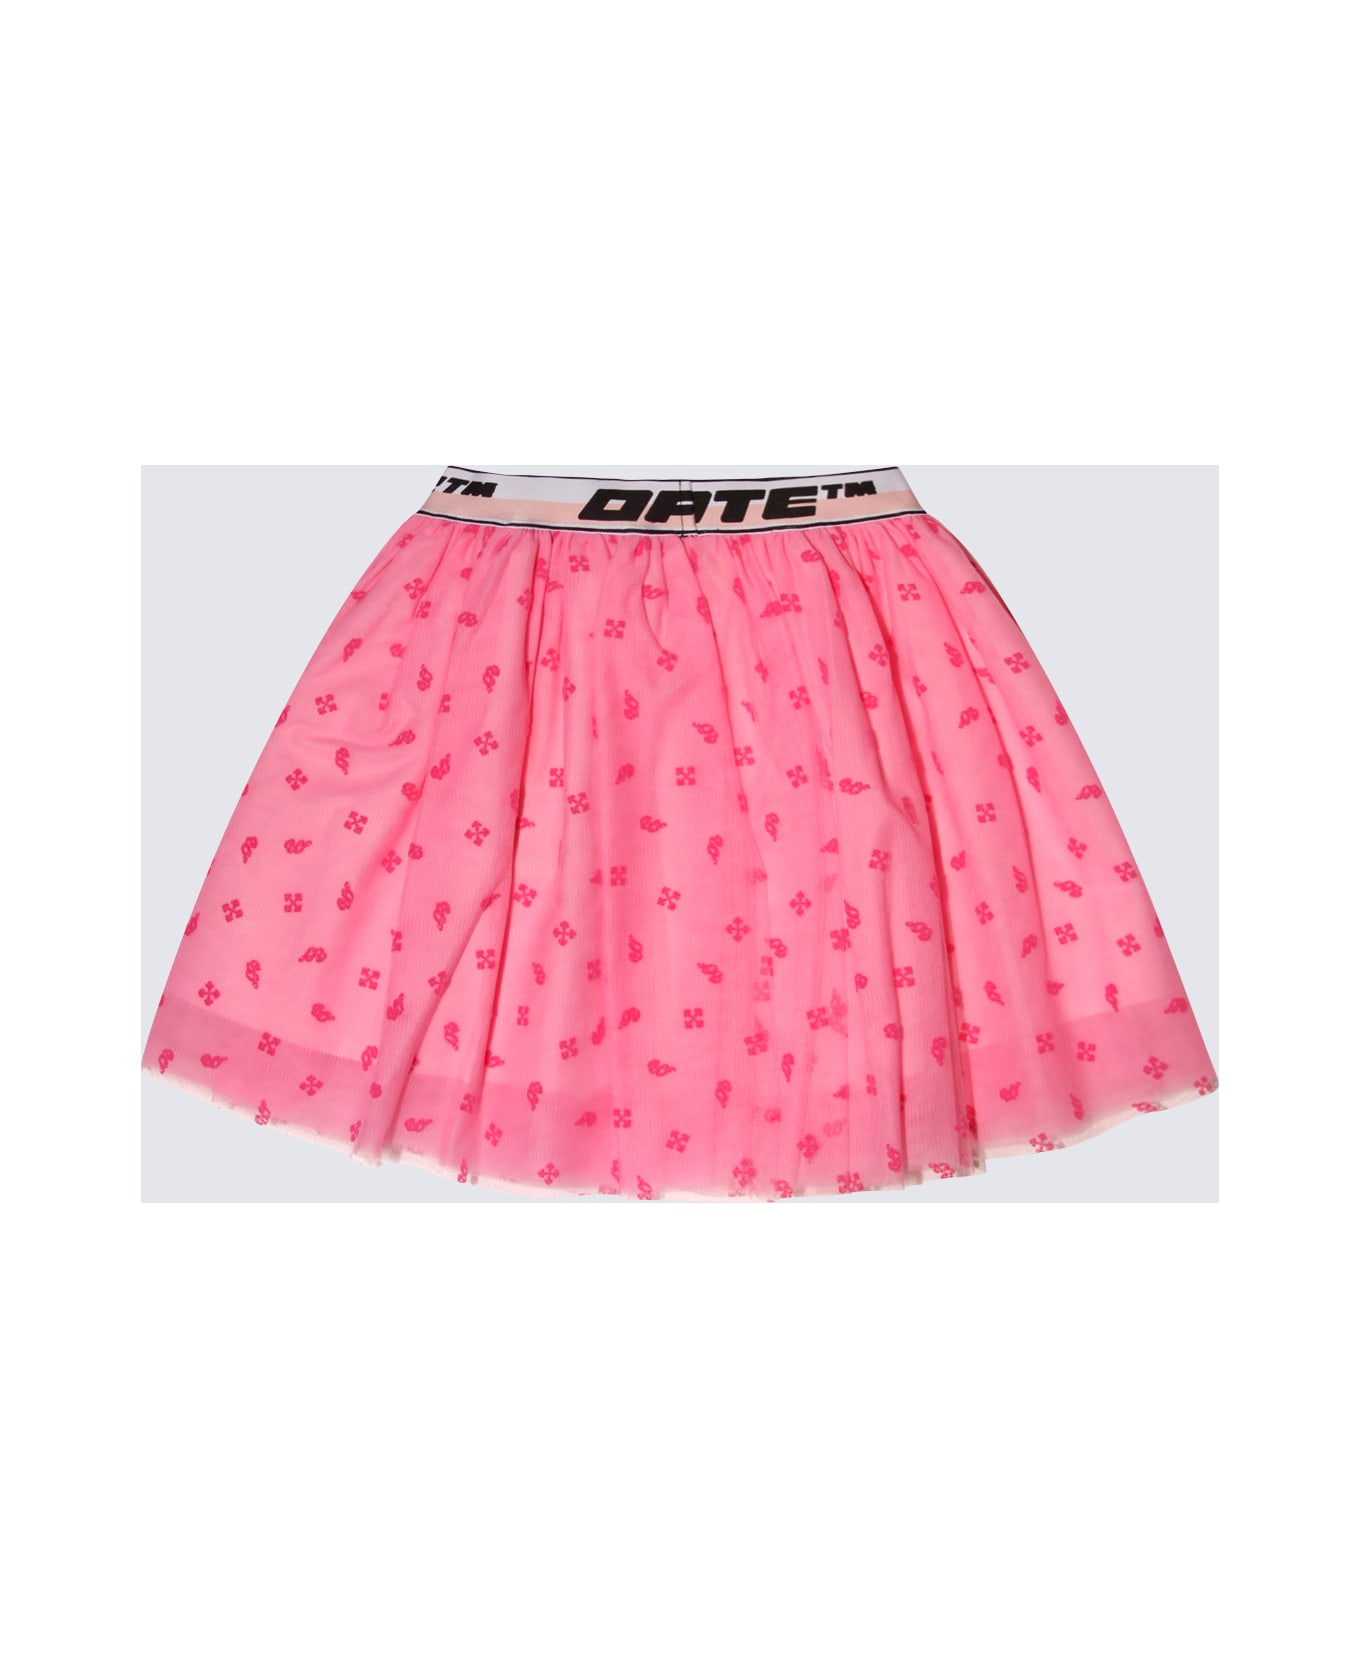 Off-White Pink And Black Tulle Skirt - PINK/BLACK